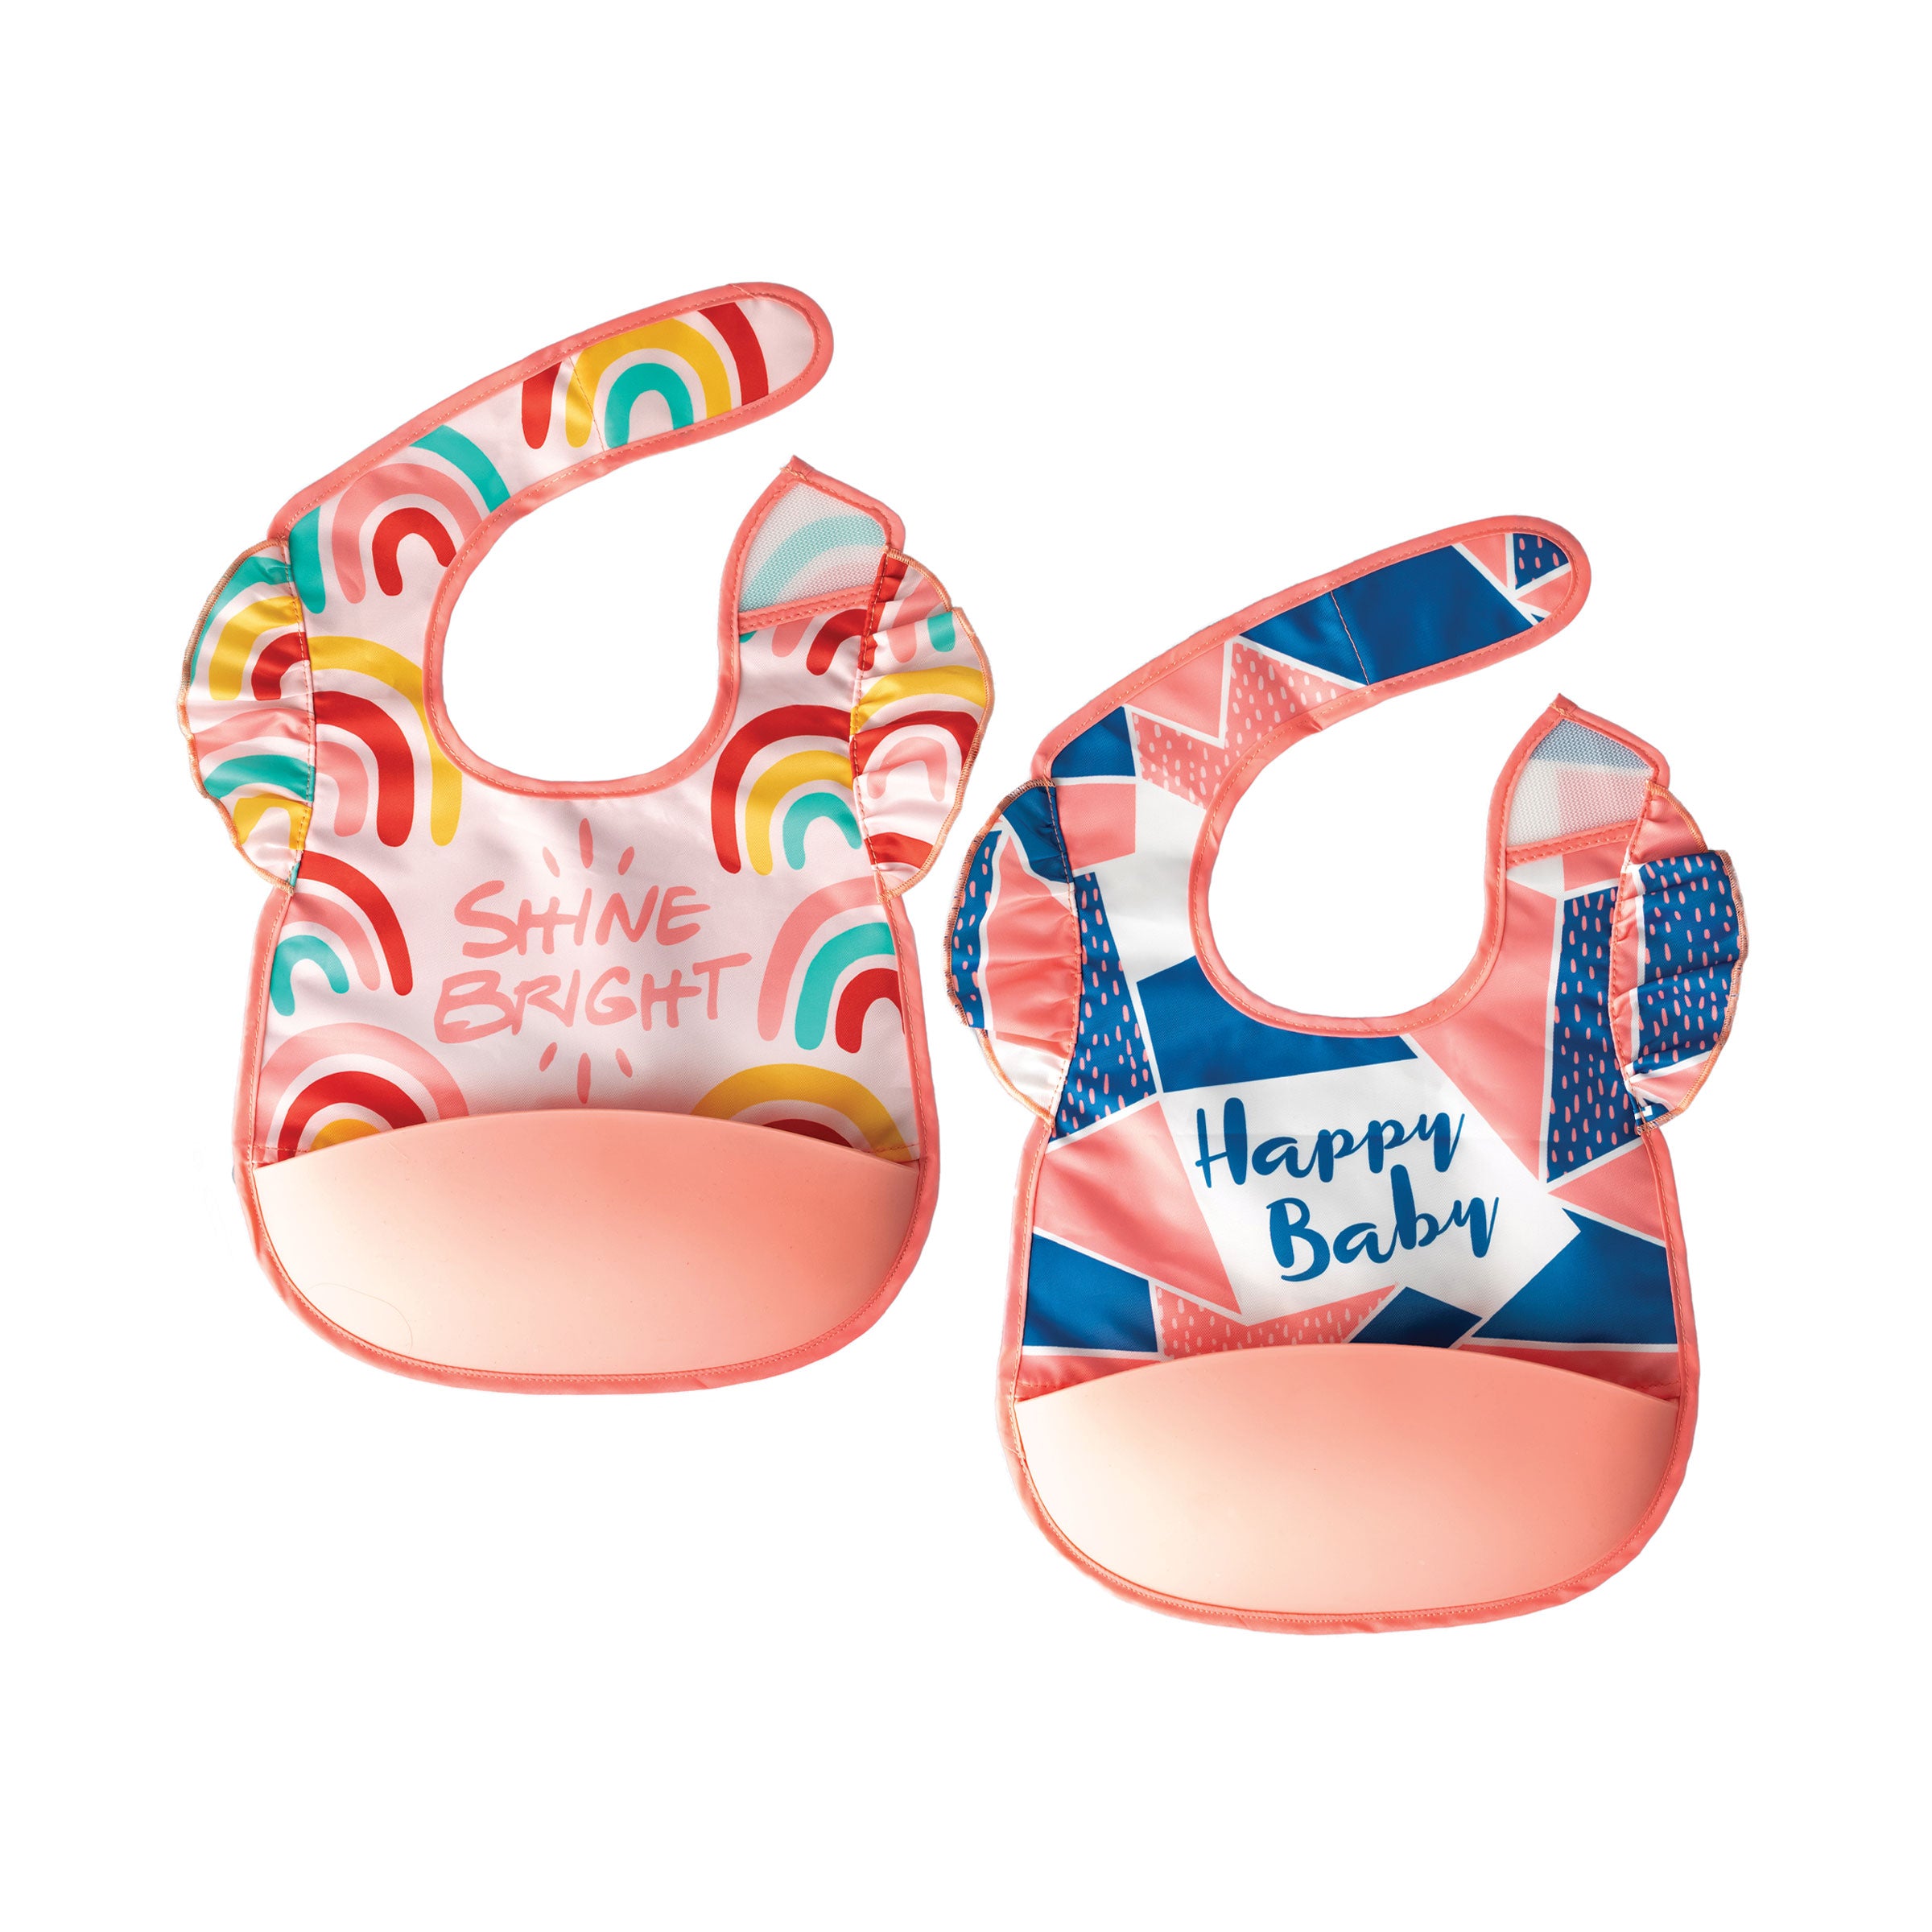 PACK 2 CHUPETES BIBS ·ROUND WHITE/ISLAND SEA· – Happy Moments Baby